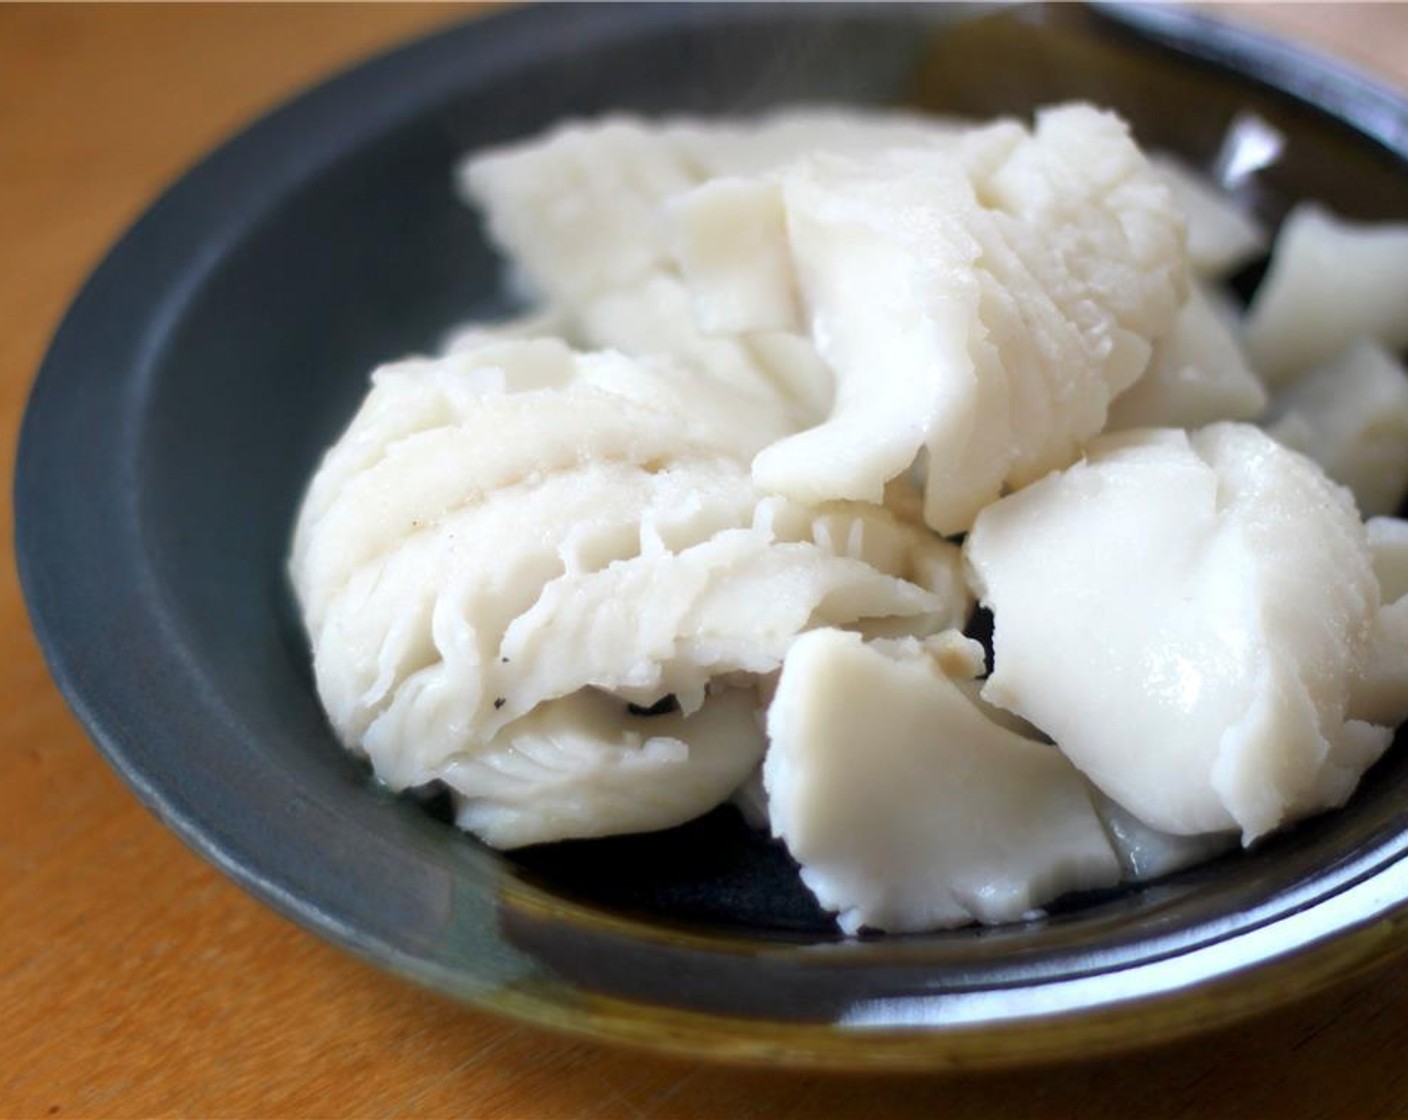 step 5 When the water is boiling, drop in your Cod Fillets (2) to poach for about 4 minutes, or longer if you have large pieces.  You'll know when it's done when the fish is delicate and flaky.